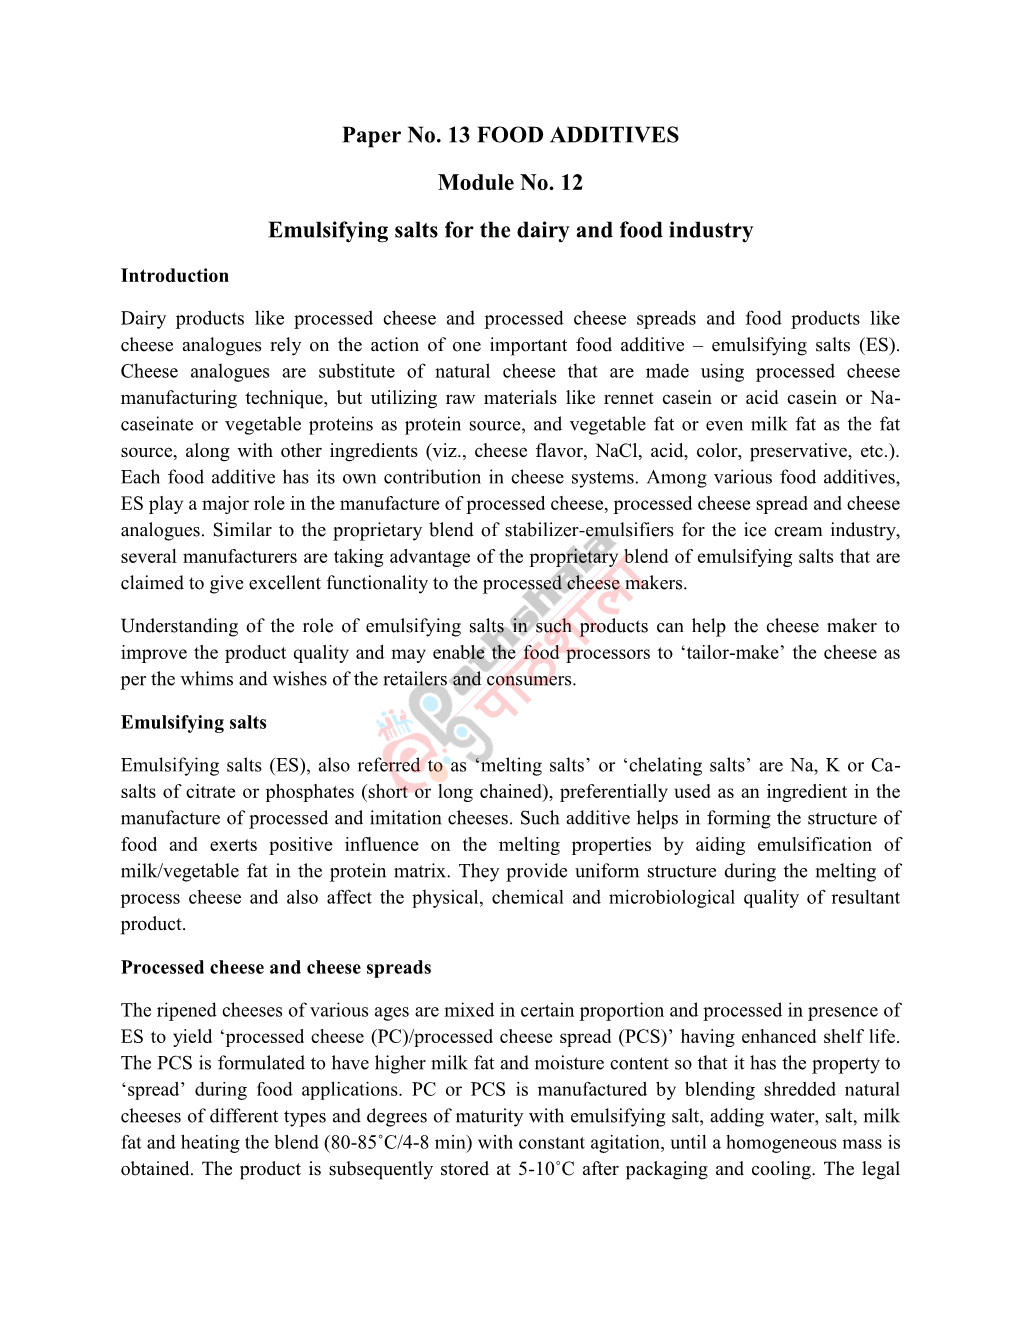 Paper No. 13 FOOD ADDITIVES Module No. 12 Emulsifying Salts for the Dairy and Food Industry